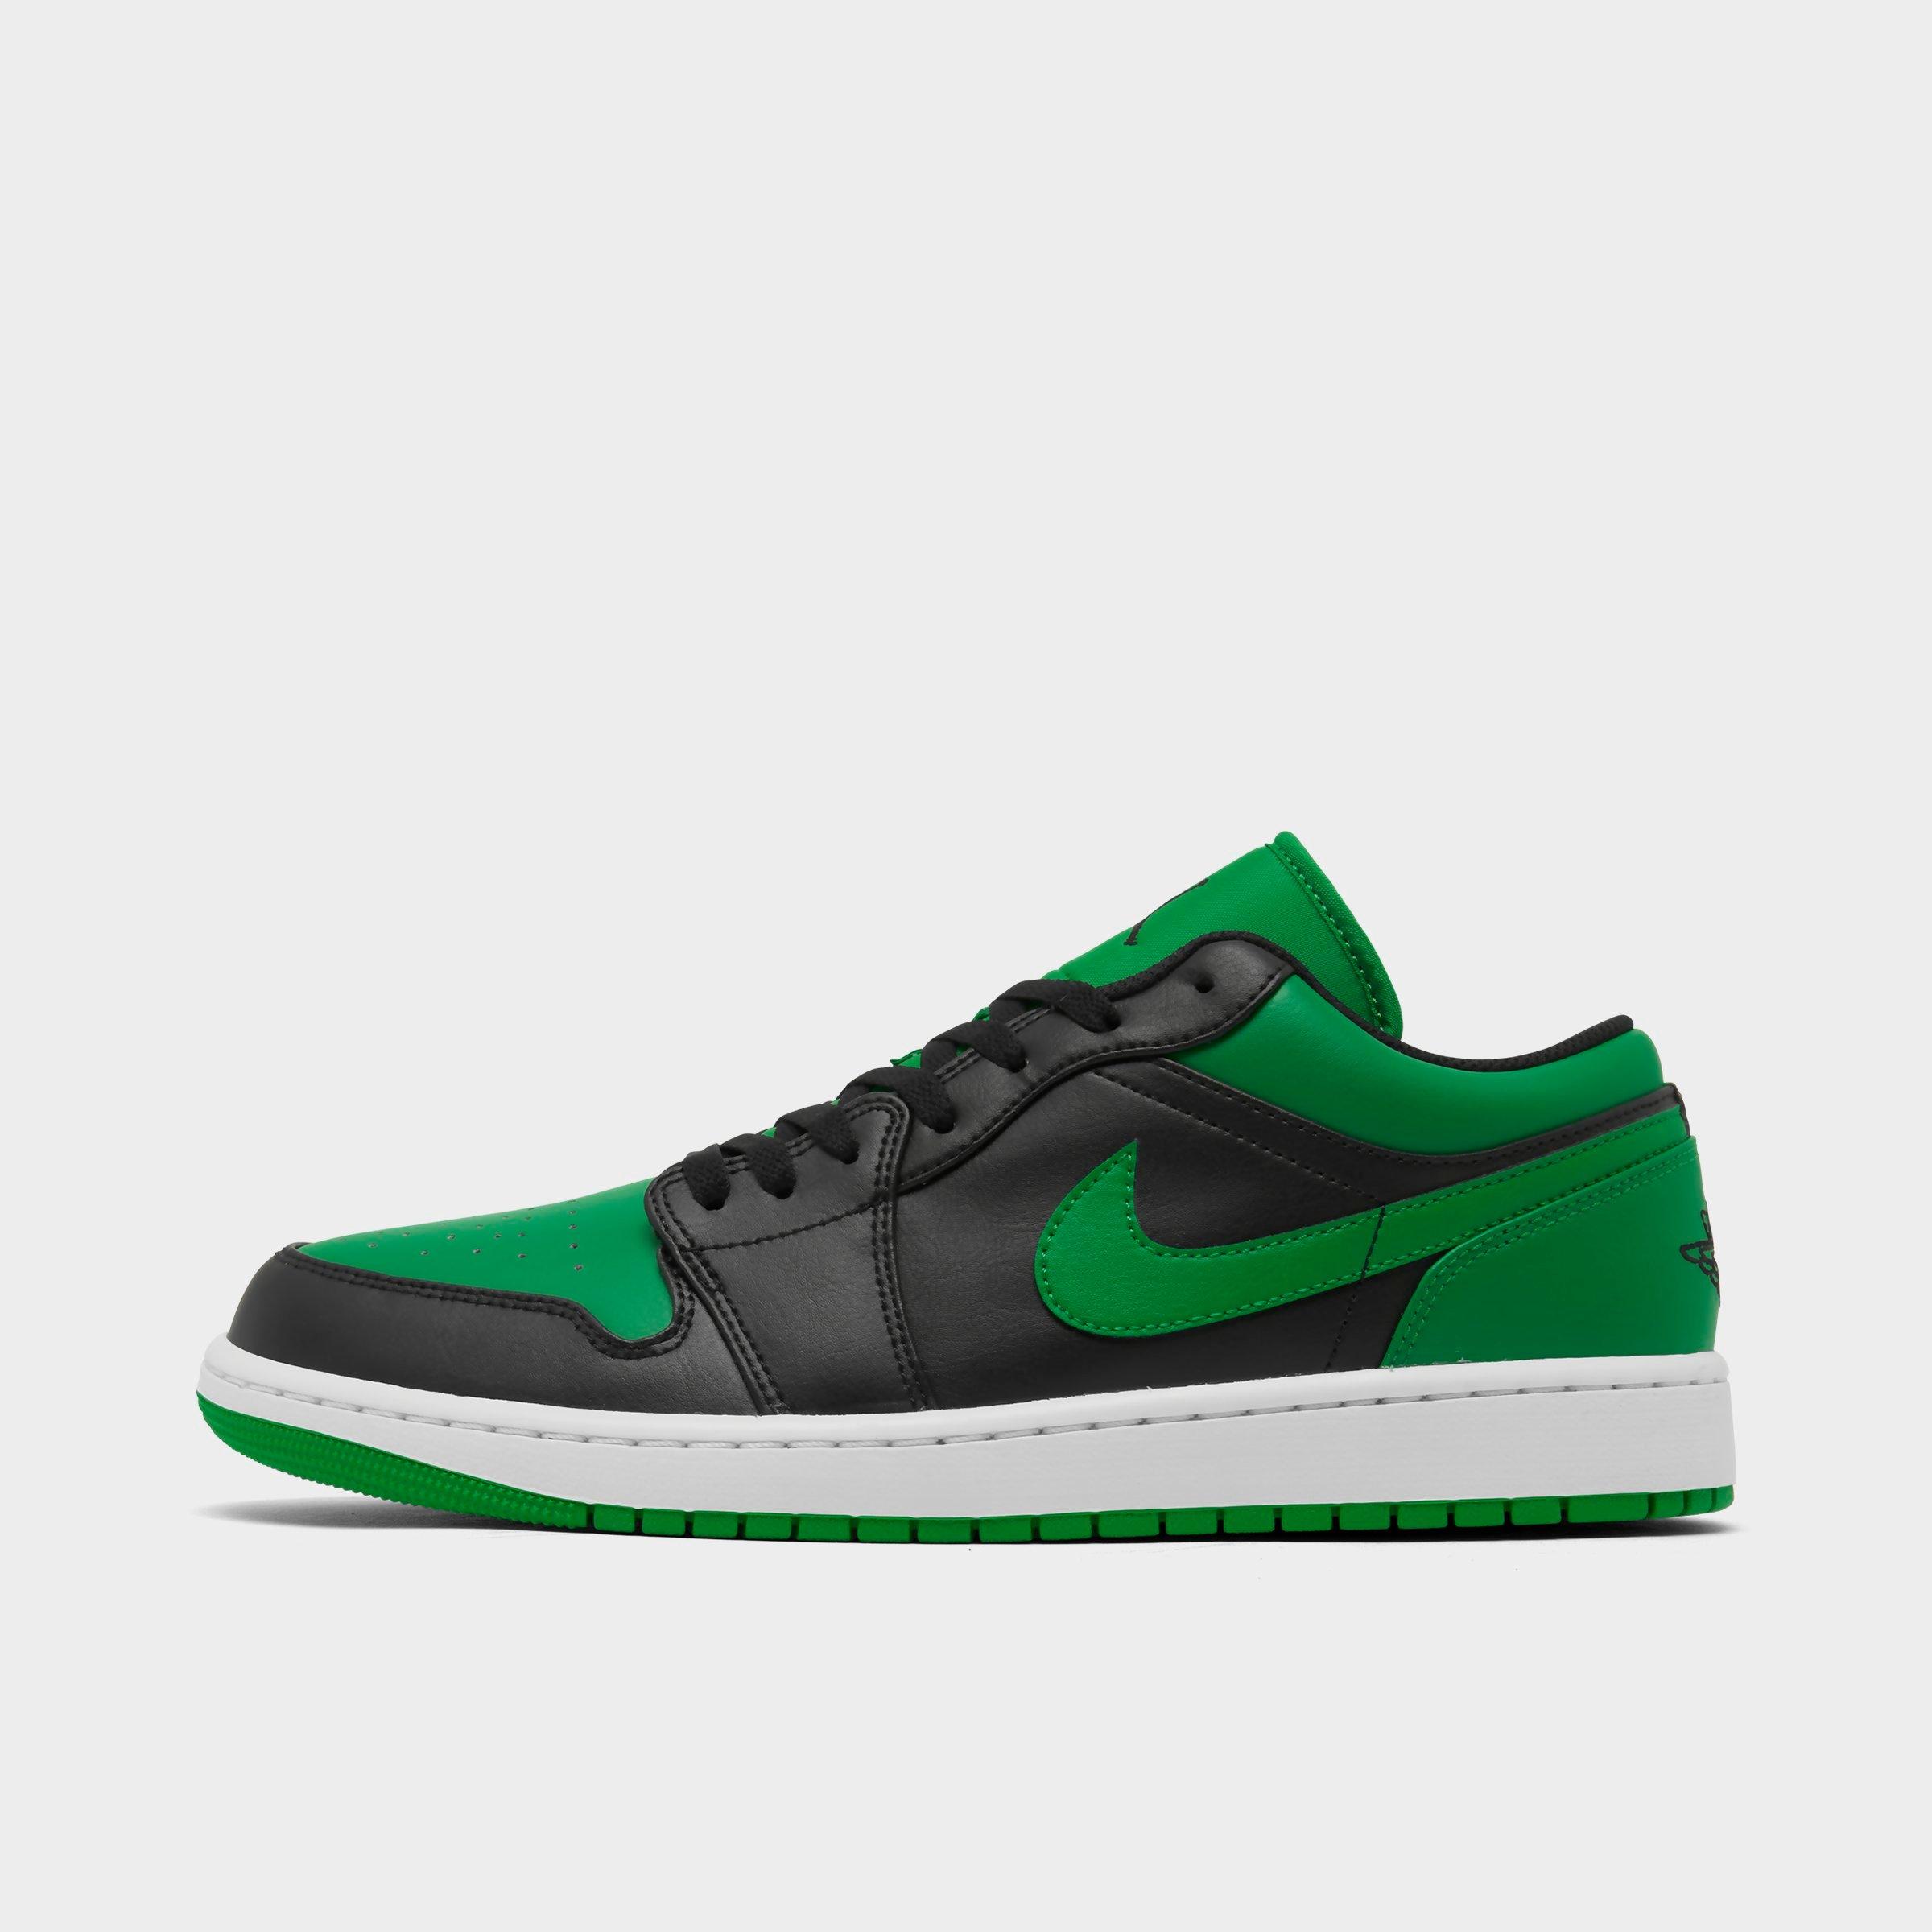 Nike Jordan Air Retro 1 Low Casual Shoes In Black/lucky Green/white